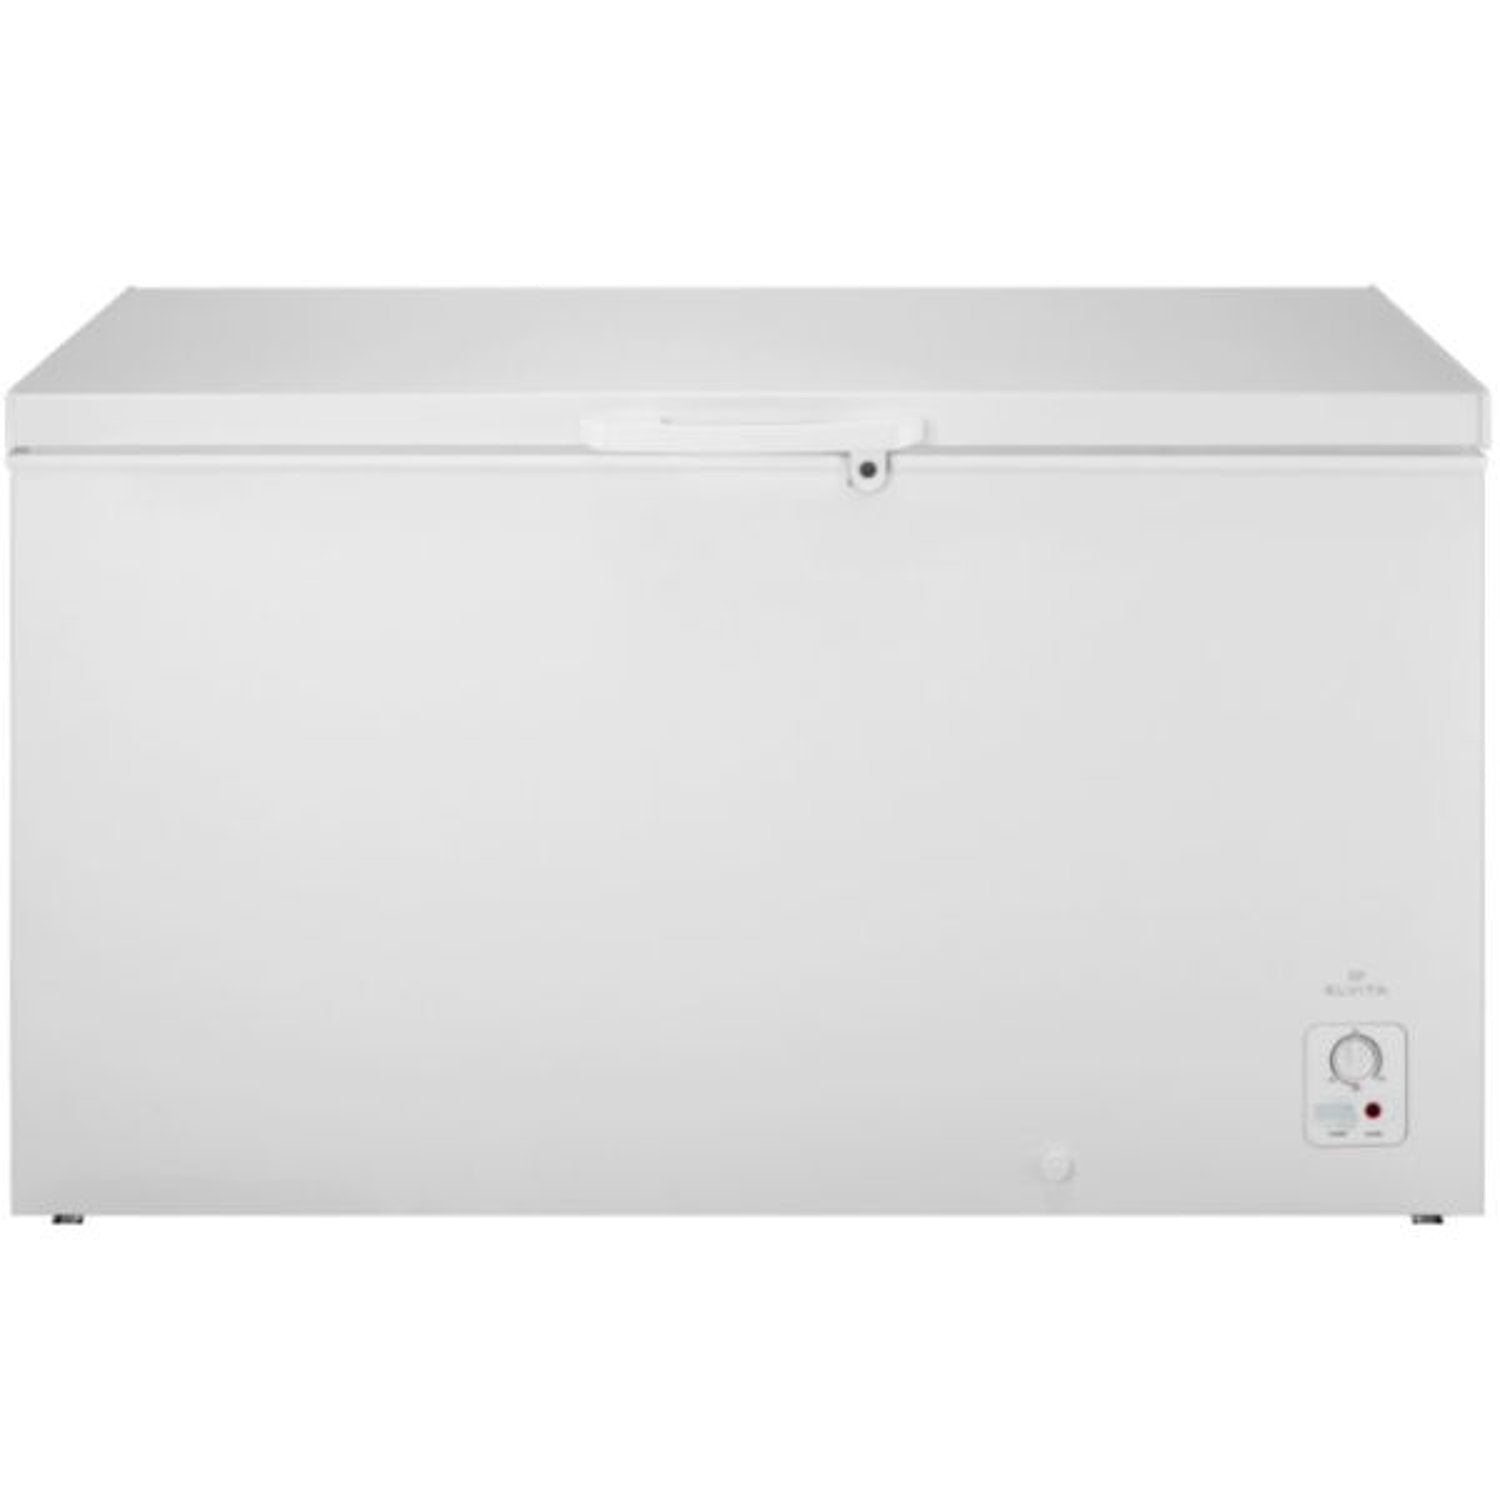 Kelon Chest Freezer | Capacity 550L | Color White | Best Home Appliances and Electronics in Bahrain | Halabh